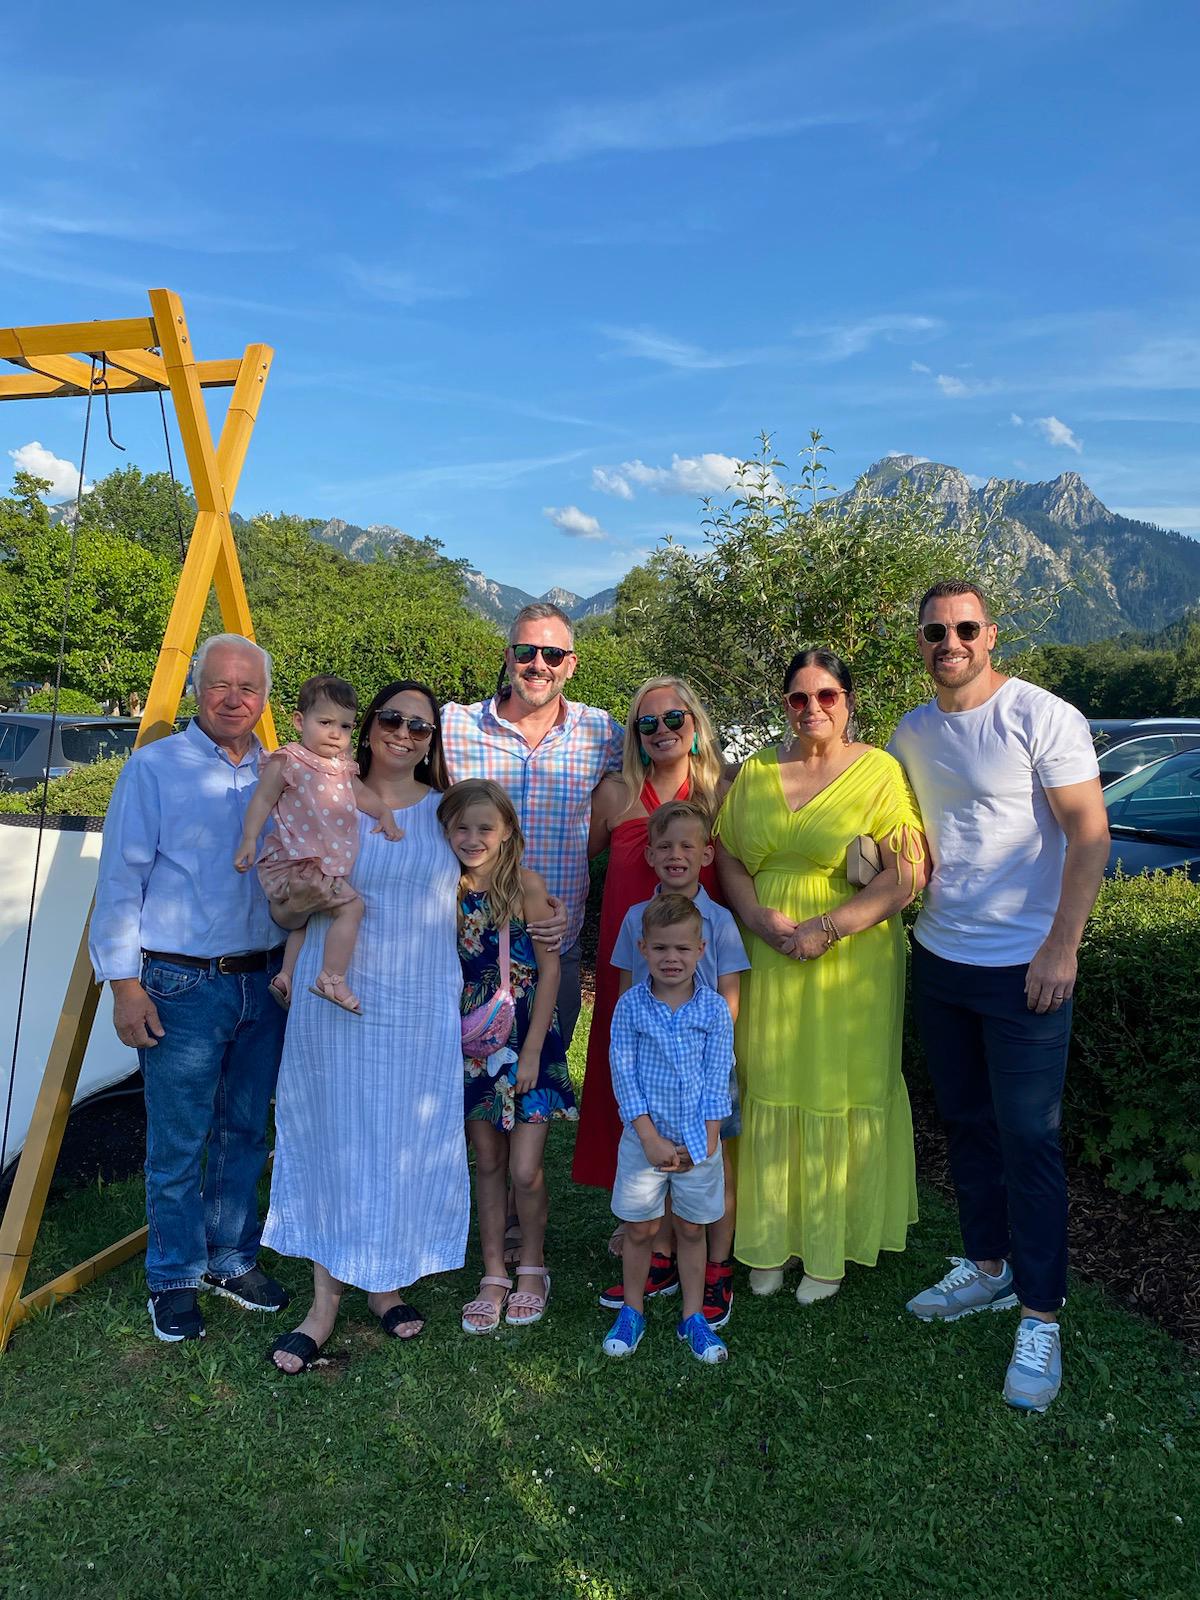 State Farm Germany trip went great! Got to see some amazing family while we were there. Mark Pritchard - State Farm Insurance Agent Atlanta (404)856-4950